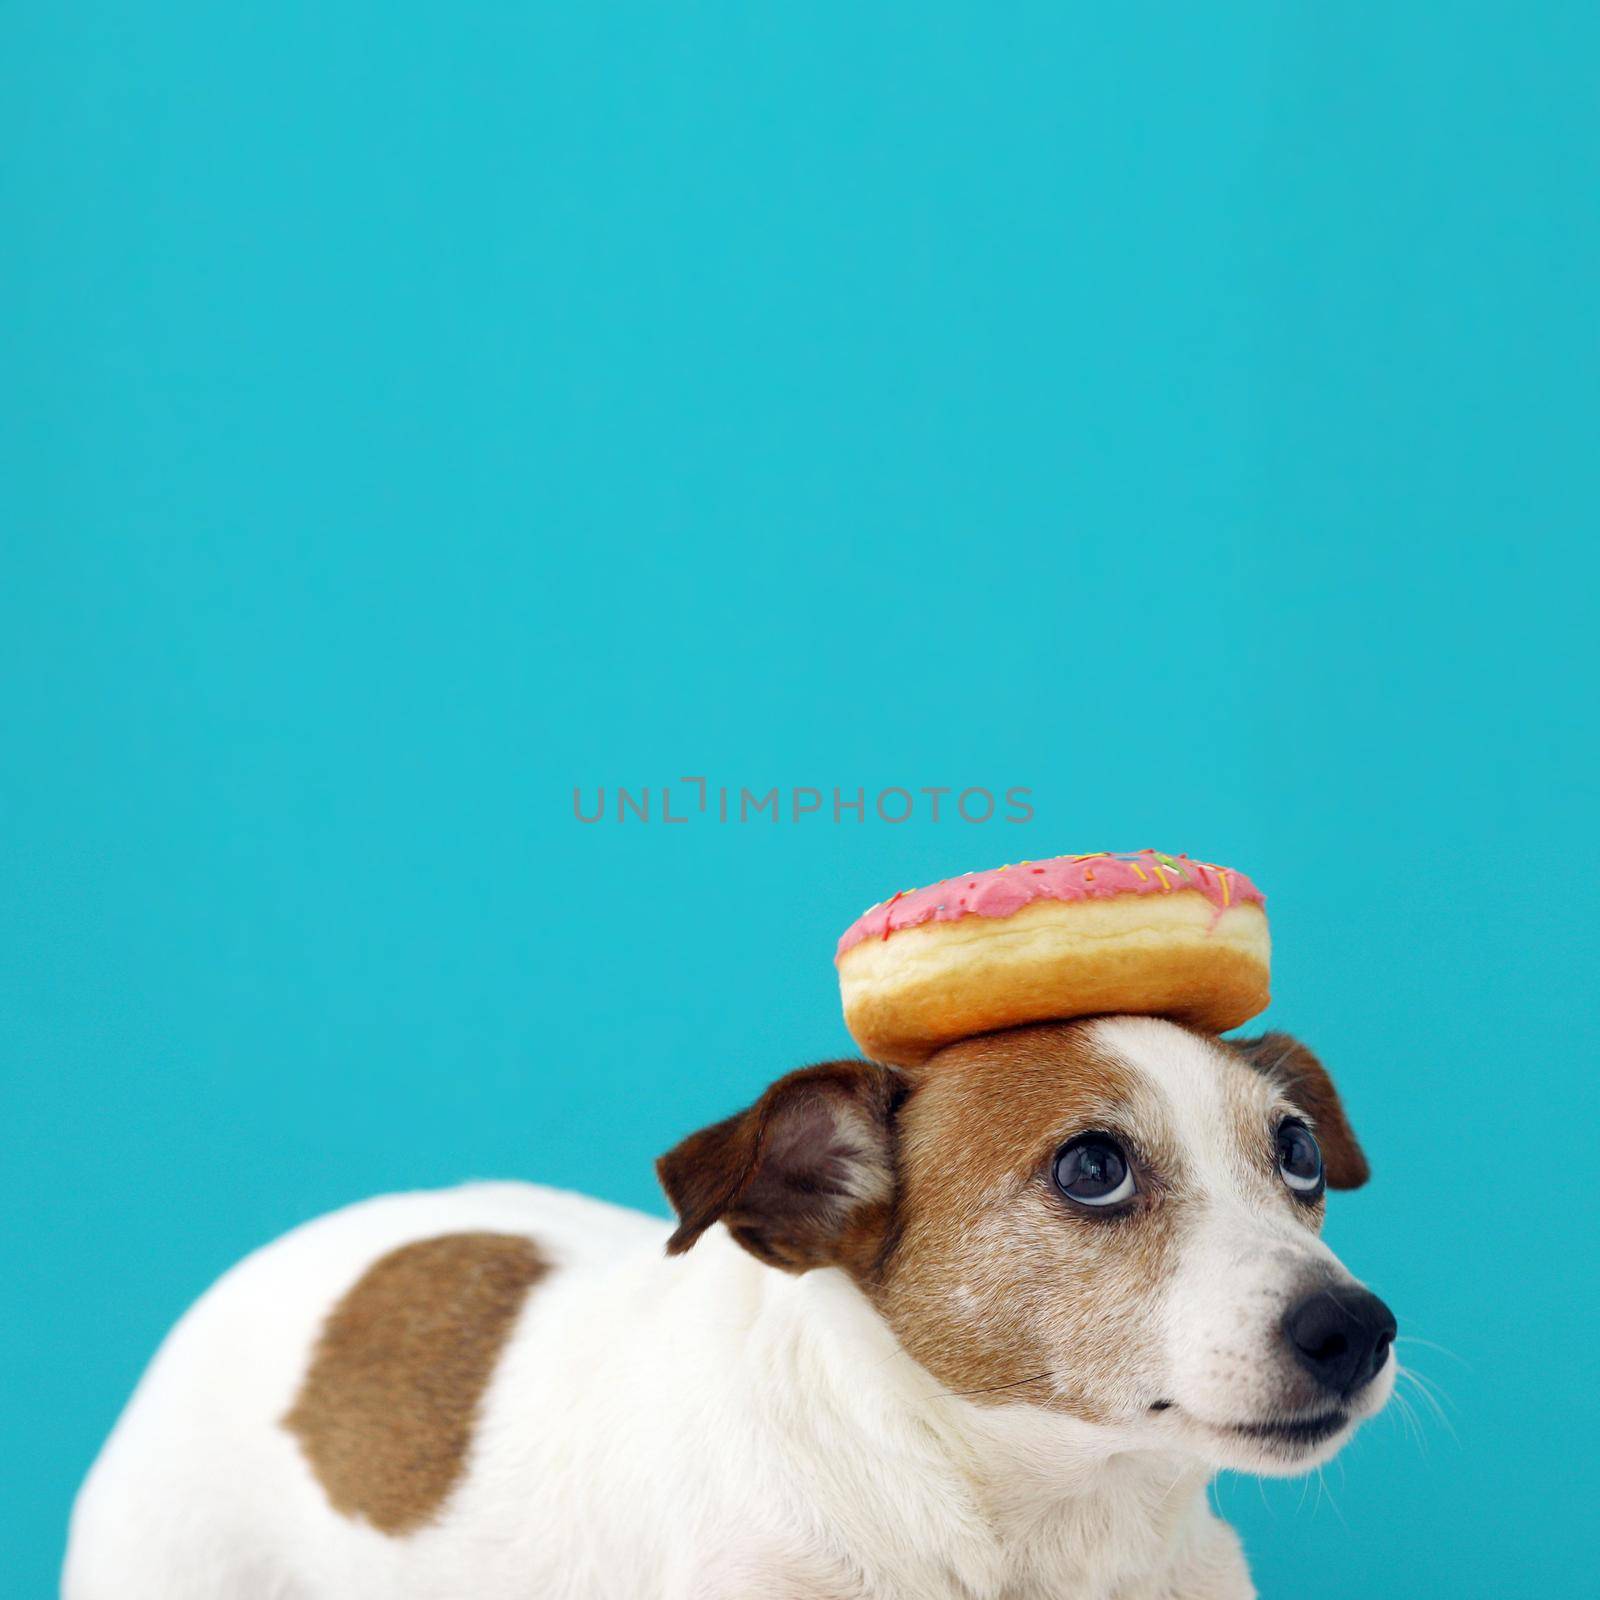 dog with a donut on head by Demkat